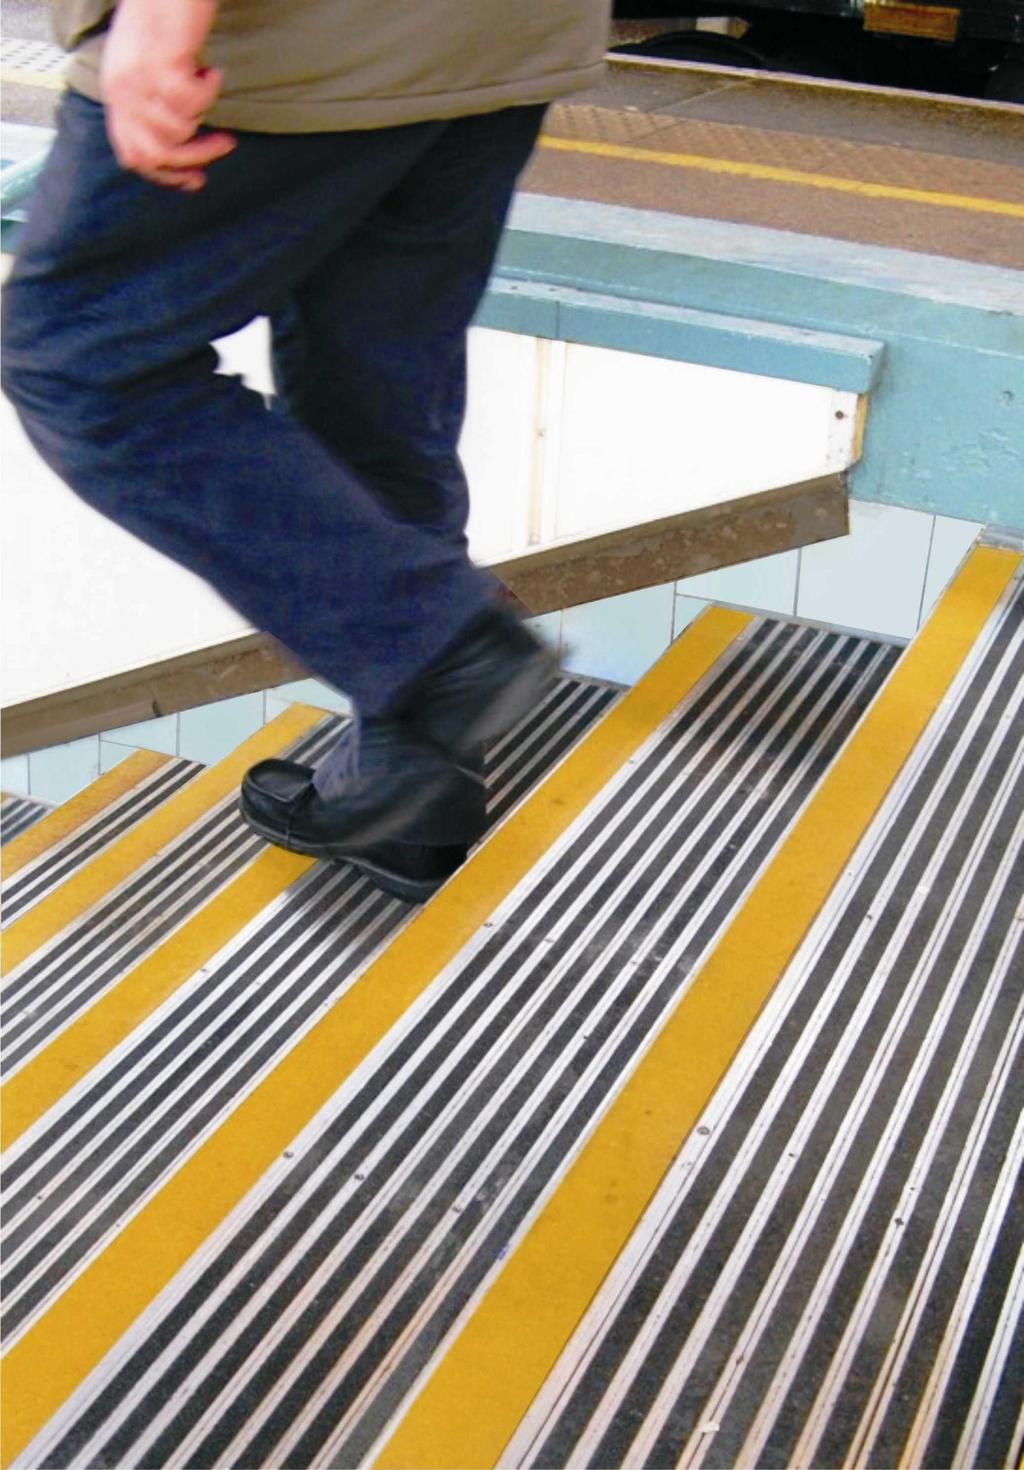 Extremely hard wearing anti slip nosings and treads Manufactured from aluminium alloy with Carbigrip tread infilling Visuline Carbigrip aluminium stair noisng gives the perfect combination of anti